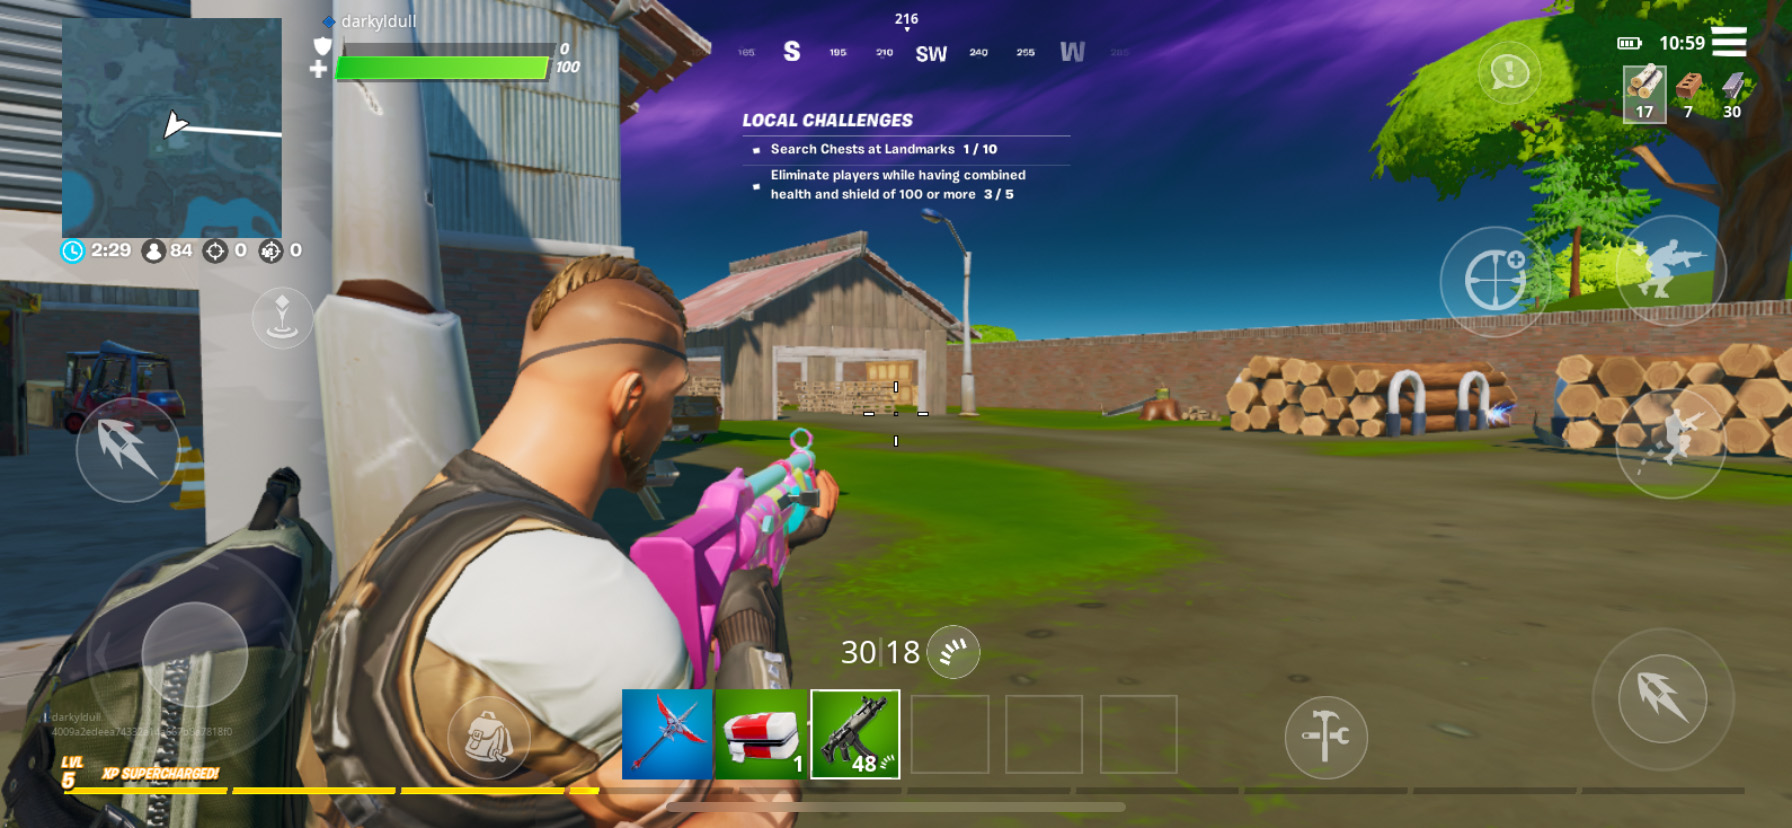 Fortnite Mobile Bluestacks The Best Android Emulator On Pc As Rated By You